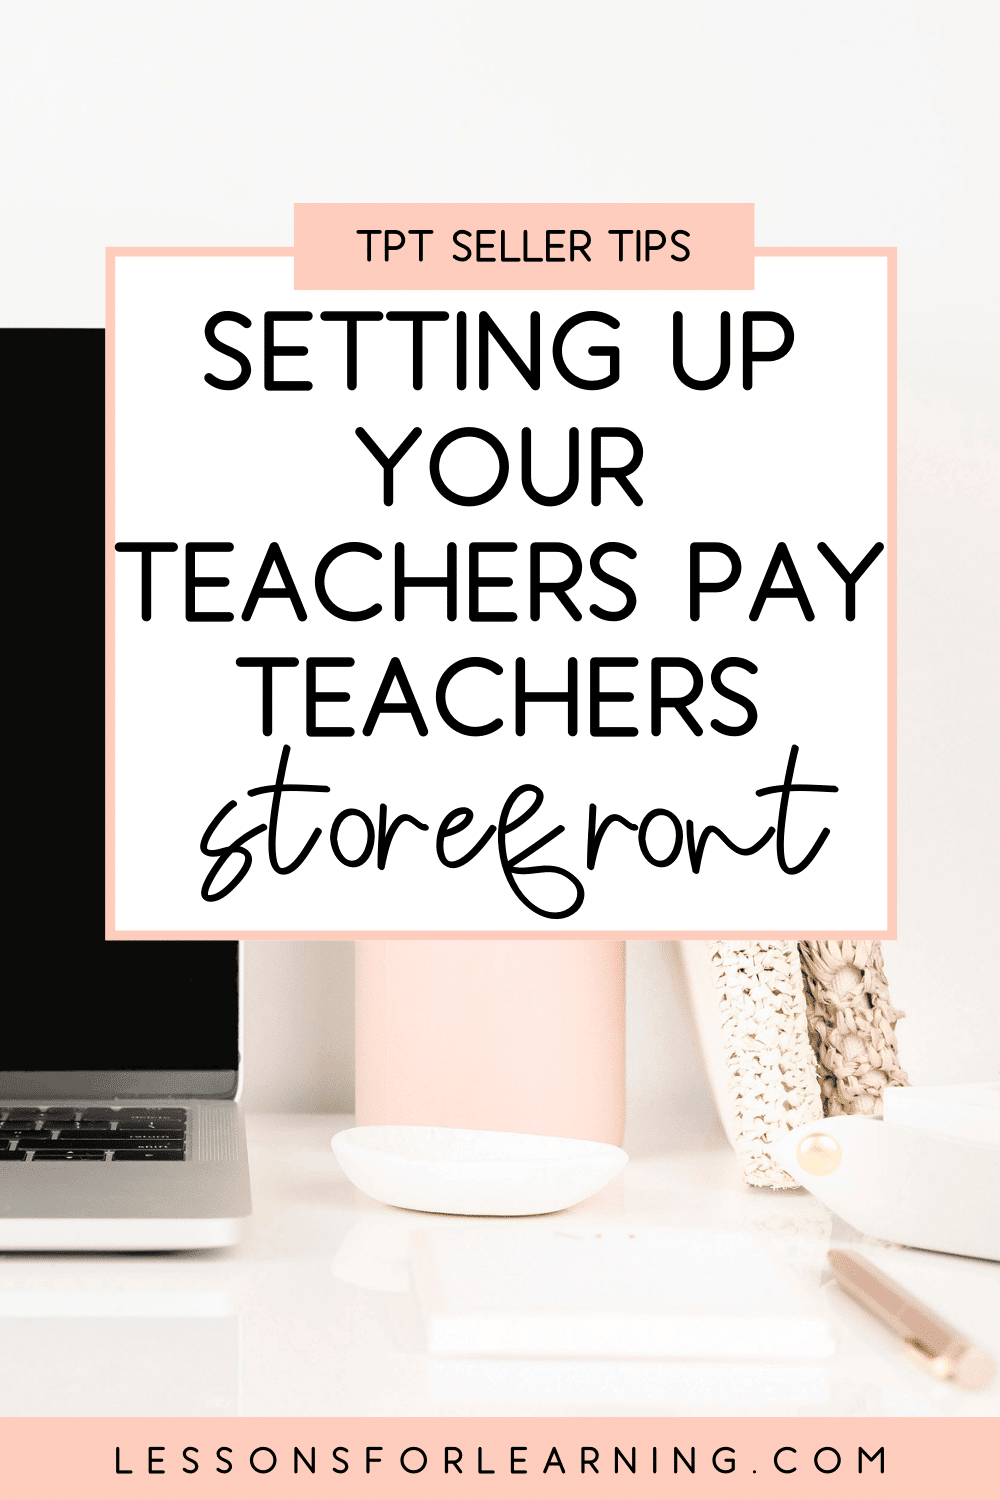 Teachers Pay Teachers Store: What to Find in Ours